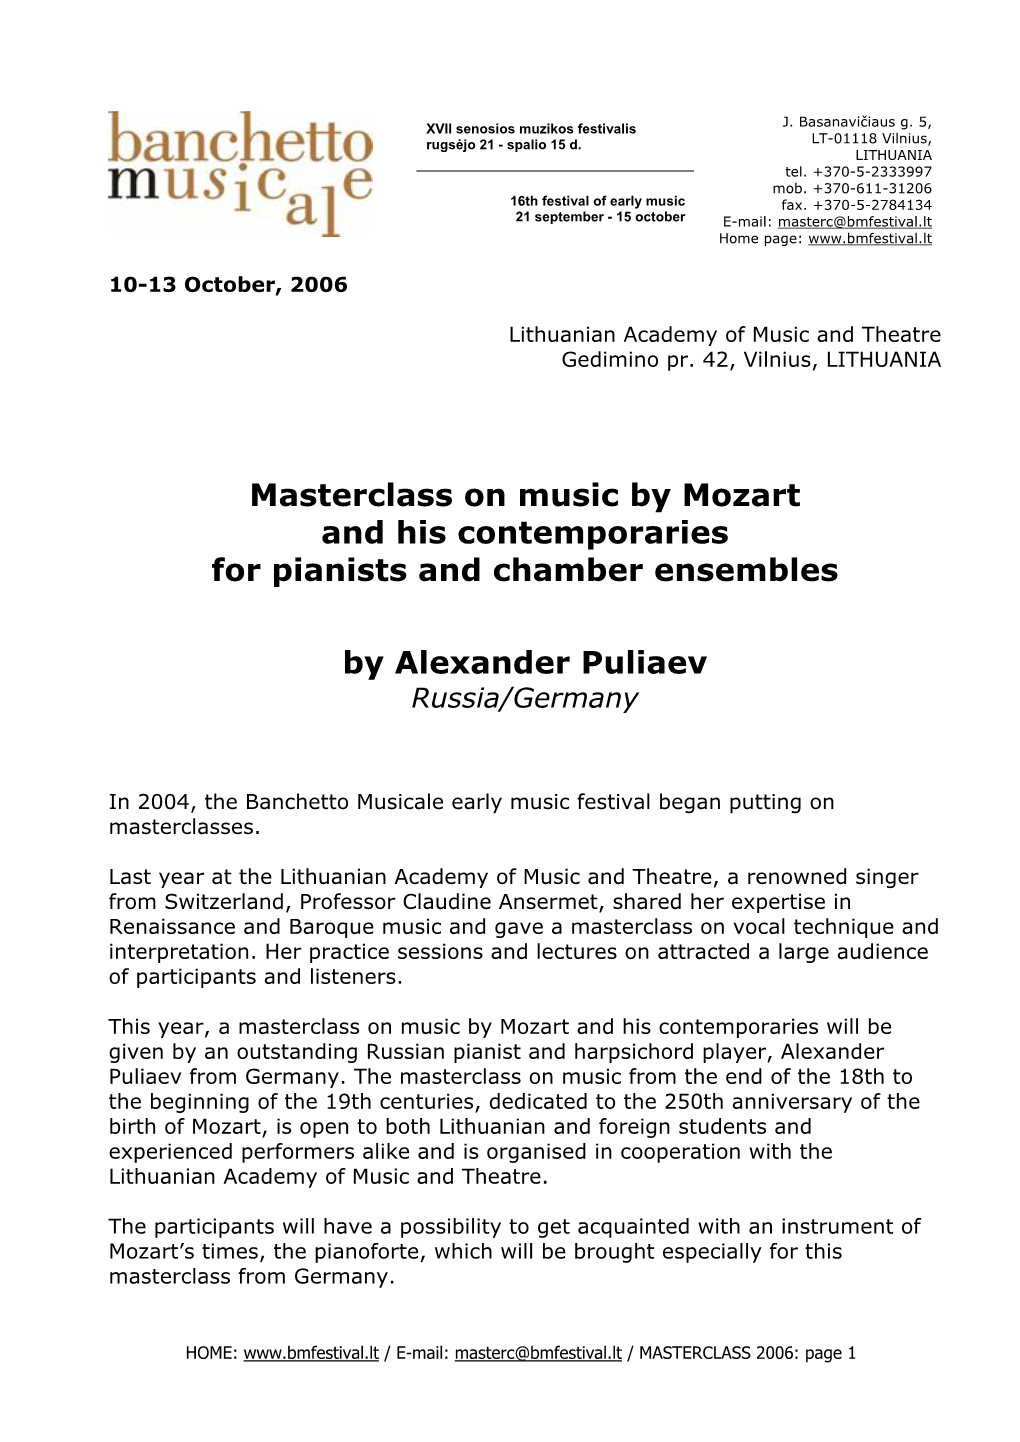 Masterclass on Music by Mozart and His Contemporaries for Pianists and Chamber Ensembles